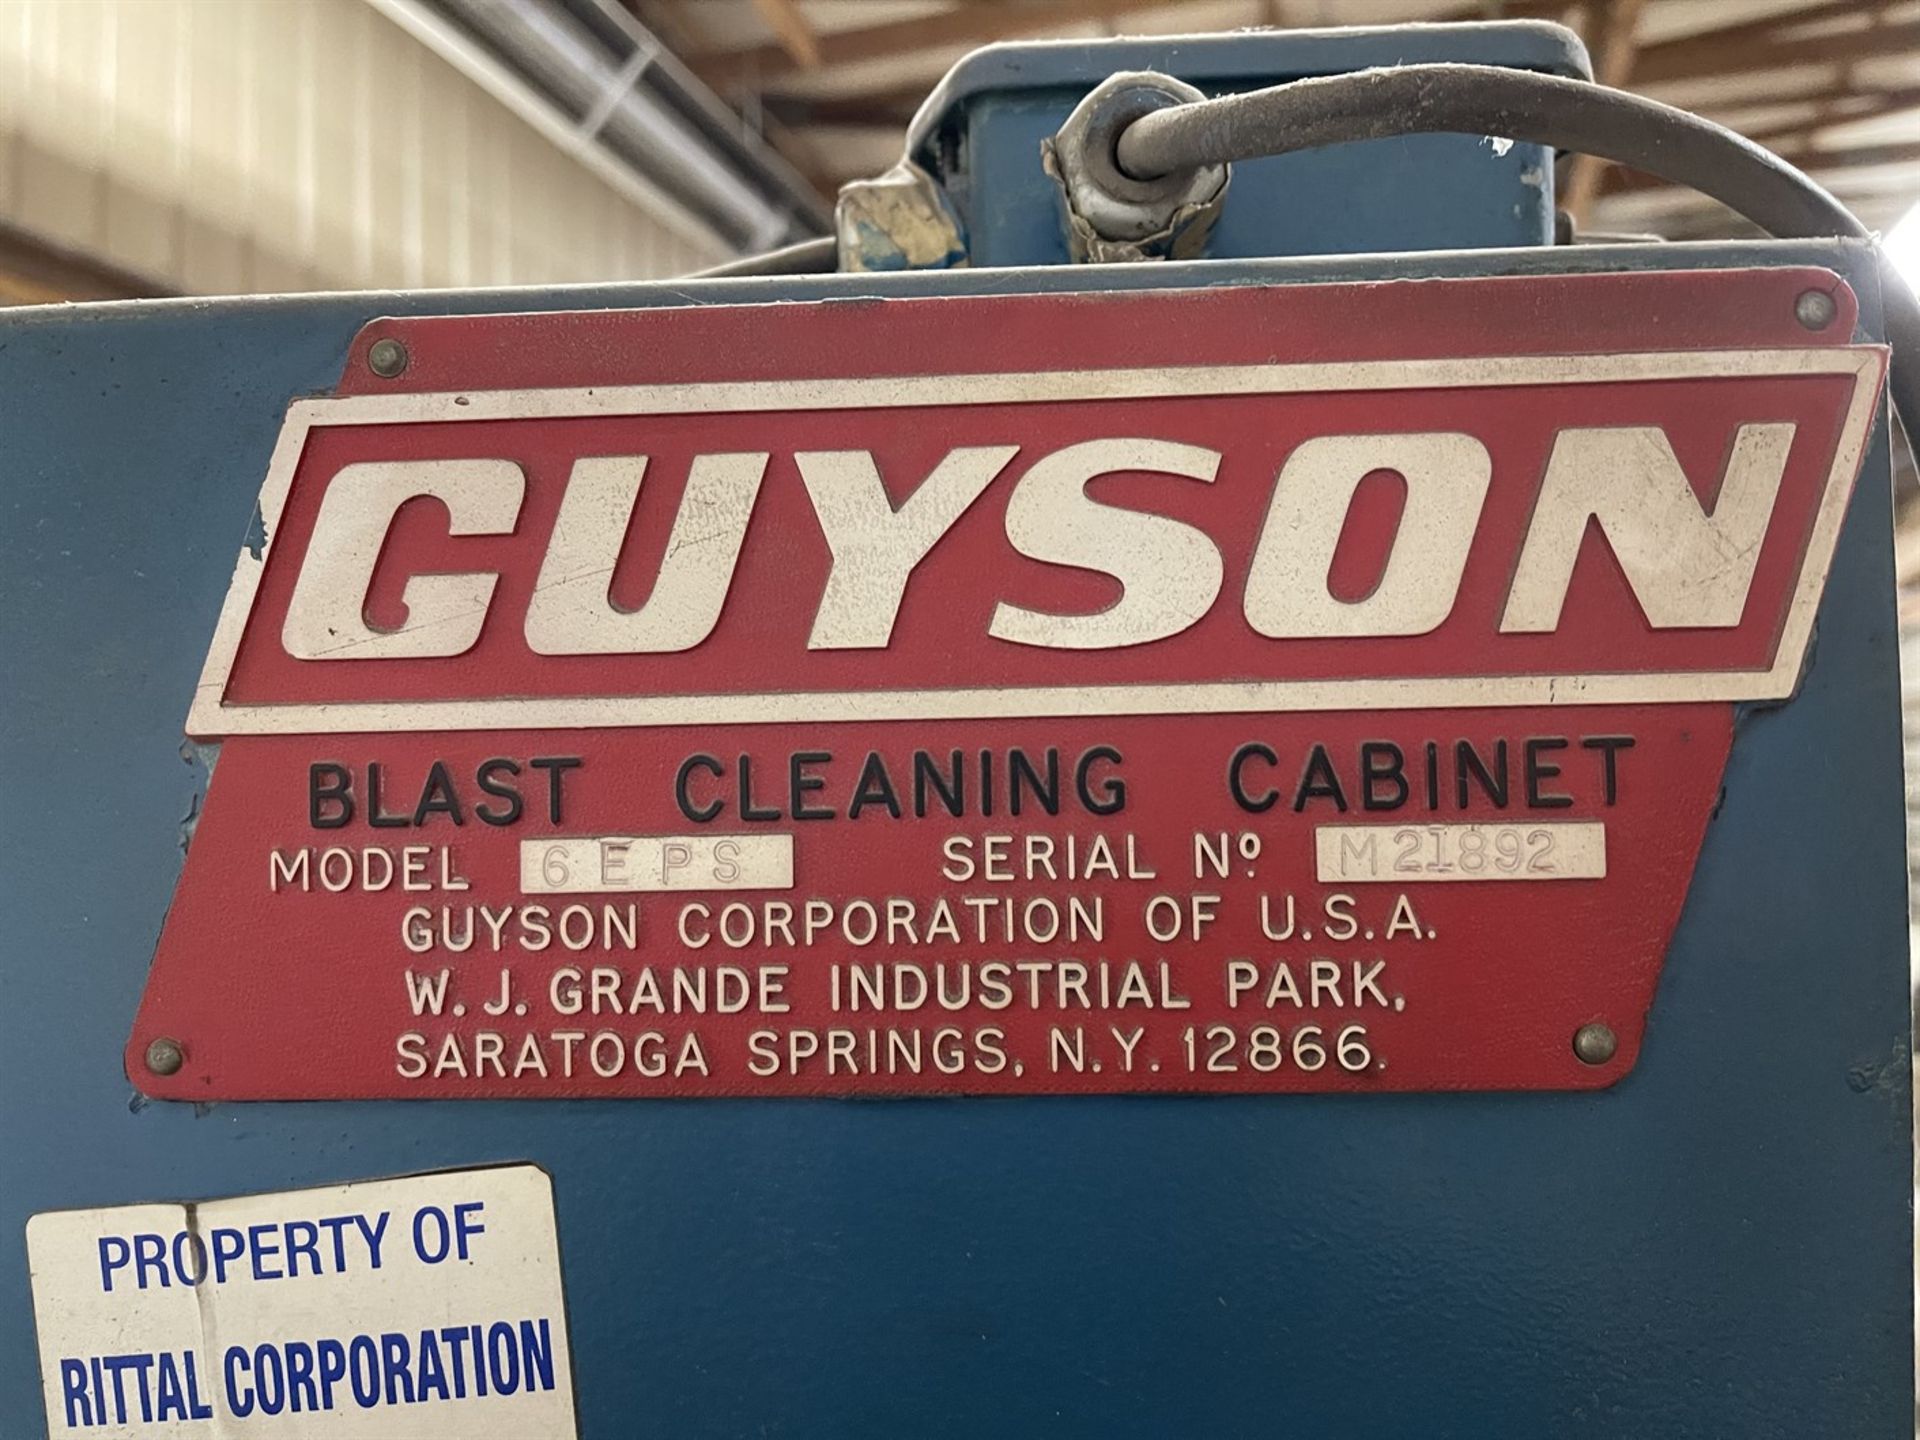 Guyson Corp 6EPS Shot Blast Cabinet, s/n M21892, (Condition Unknown) - Image 4 of 4